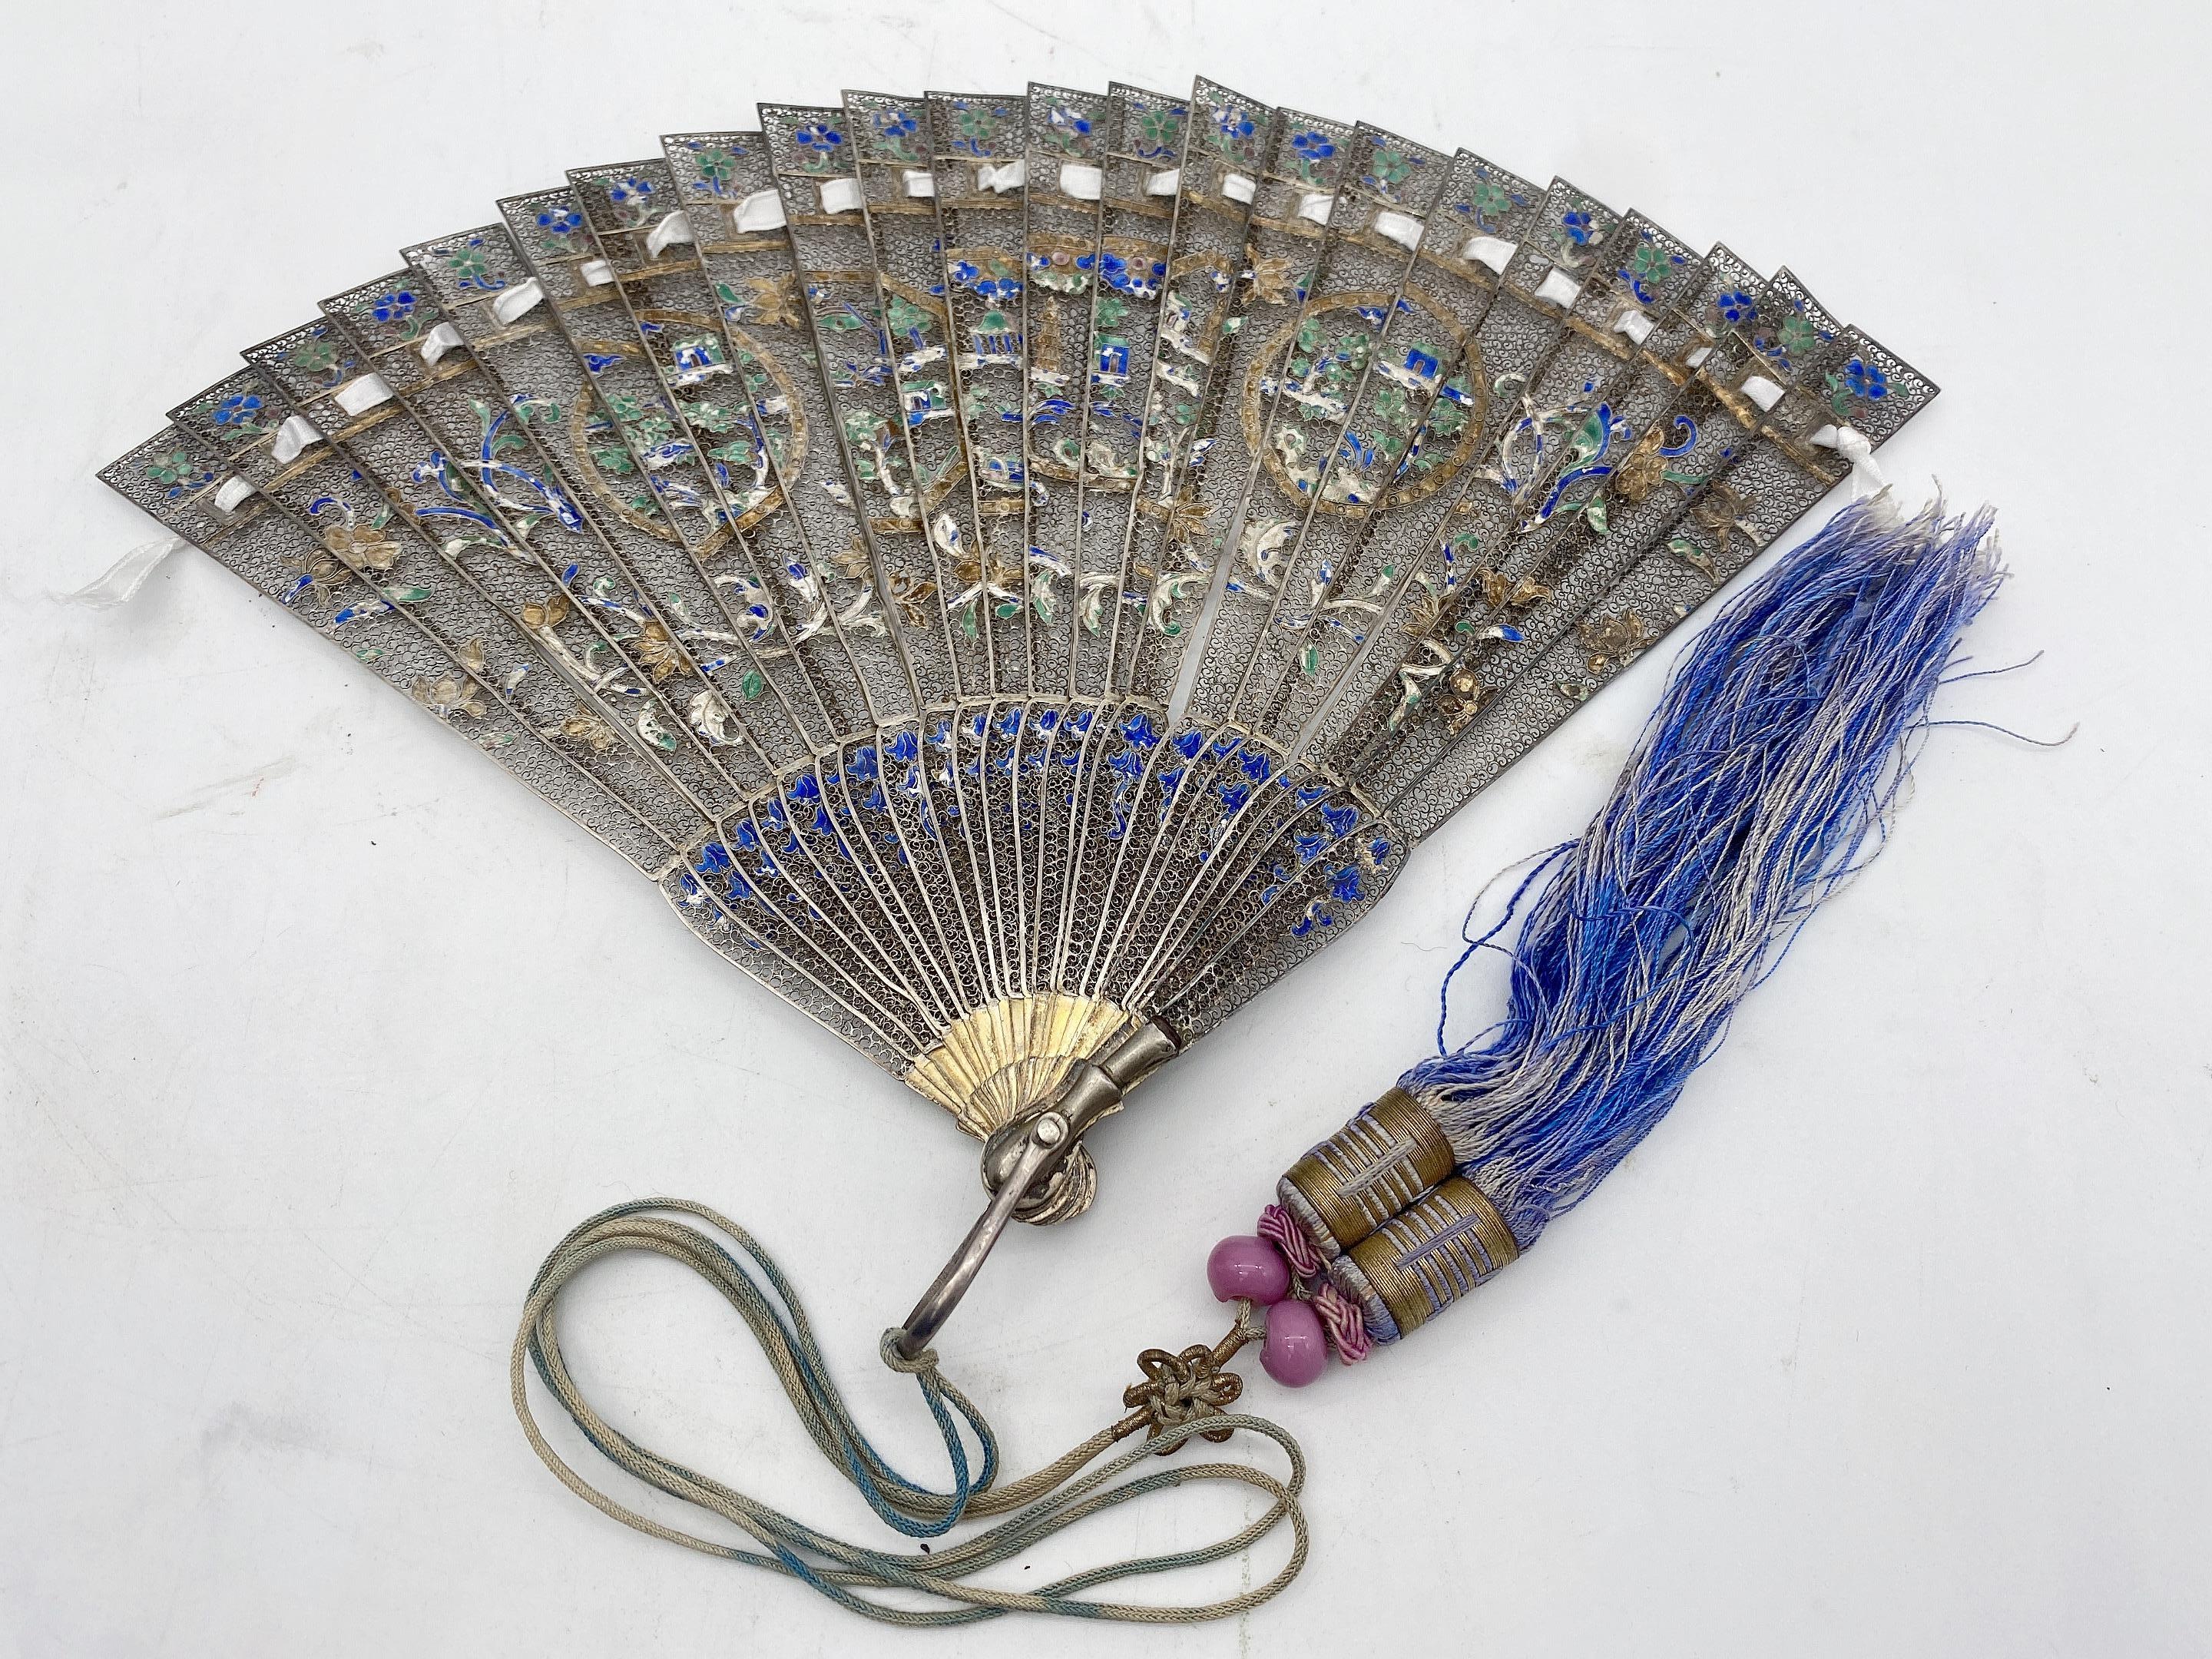 Hand-Carved Rare Antique  Qing Dynasty Chinese Gilt Silver Filigree And Enamel Brise Fan For Sale